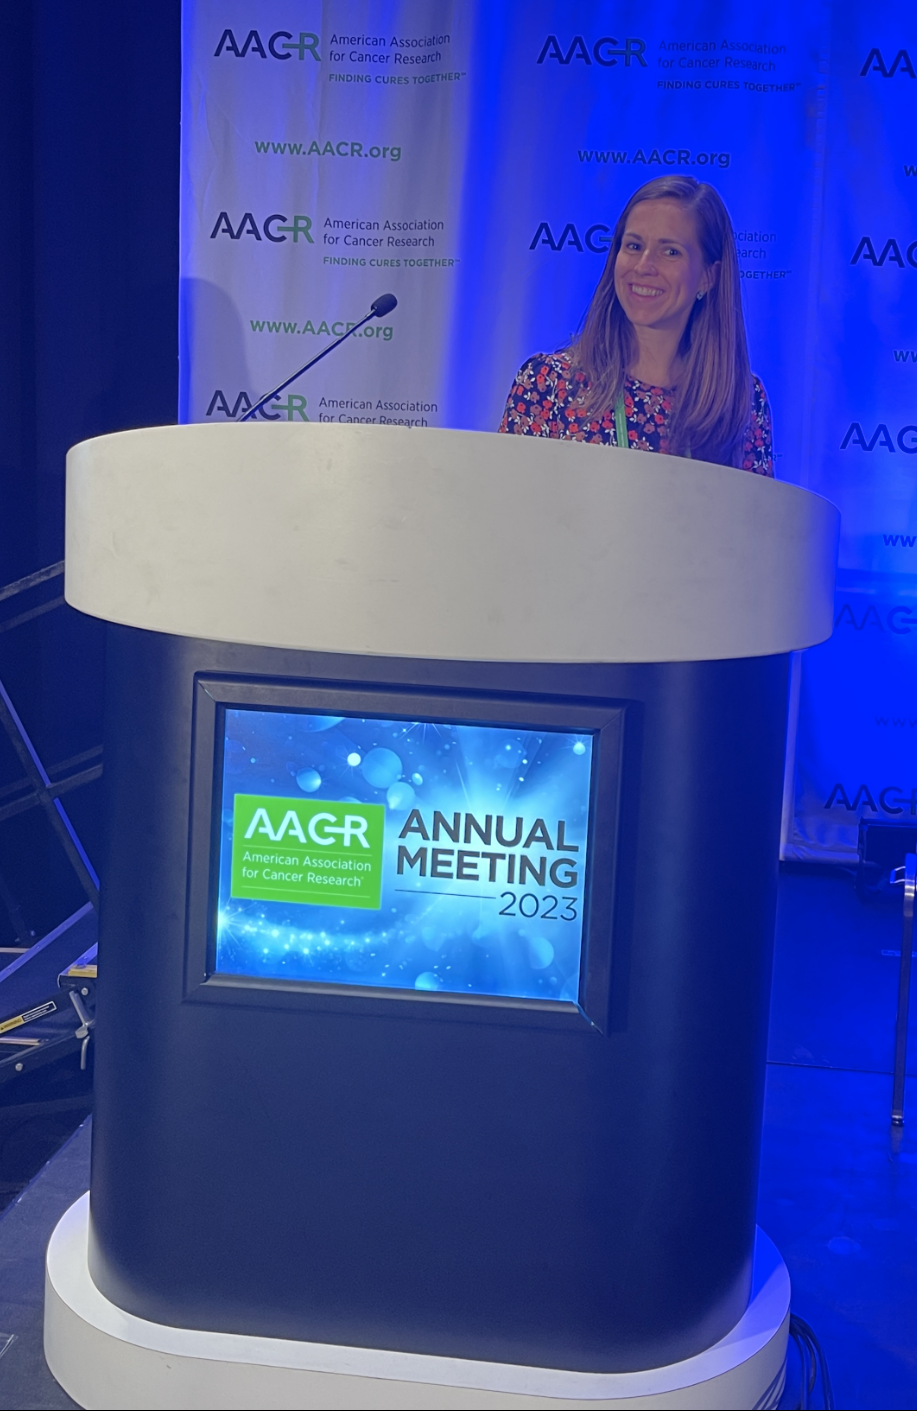 Meredith Shiels stands at a podium labeled AACR Annual Meeting 2023 at the press conference for her paper, "Opportunities for Achieving the Cancer Moonshot Goal of a 50% Reduction in Age-Adjusted Cancer Mortality by 2047."